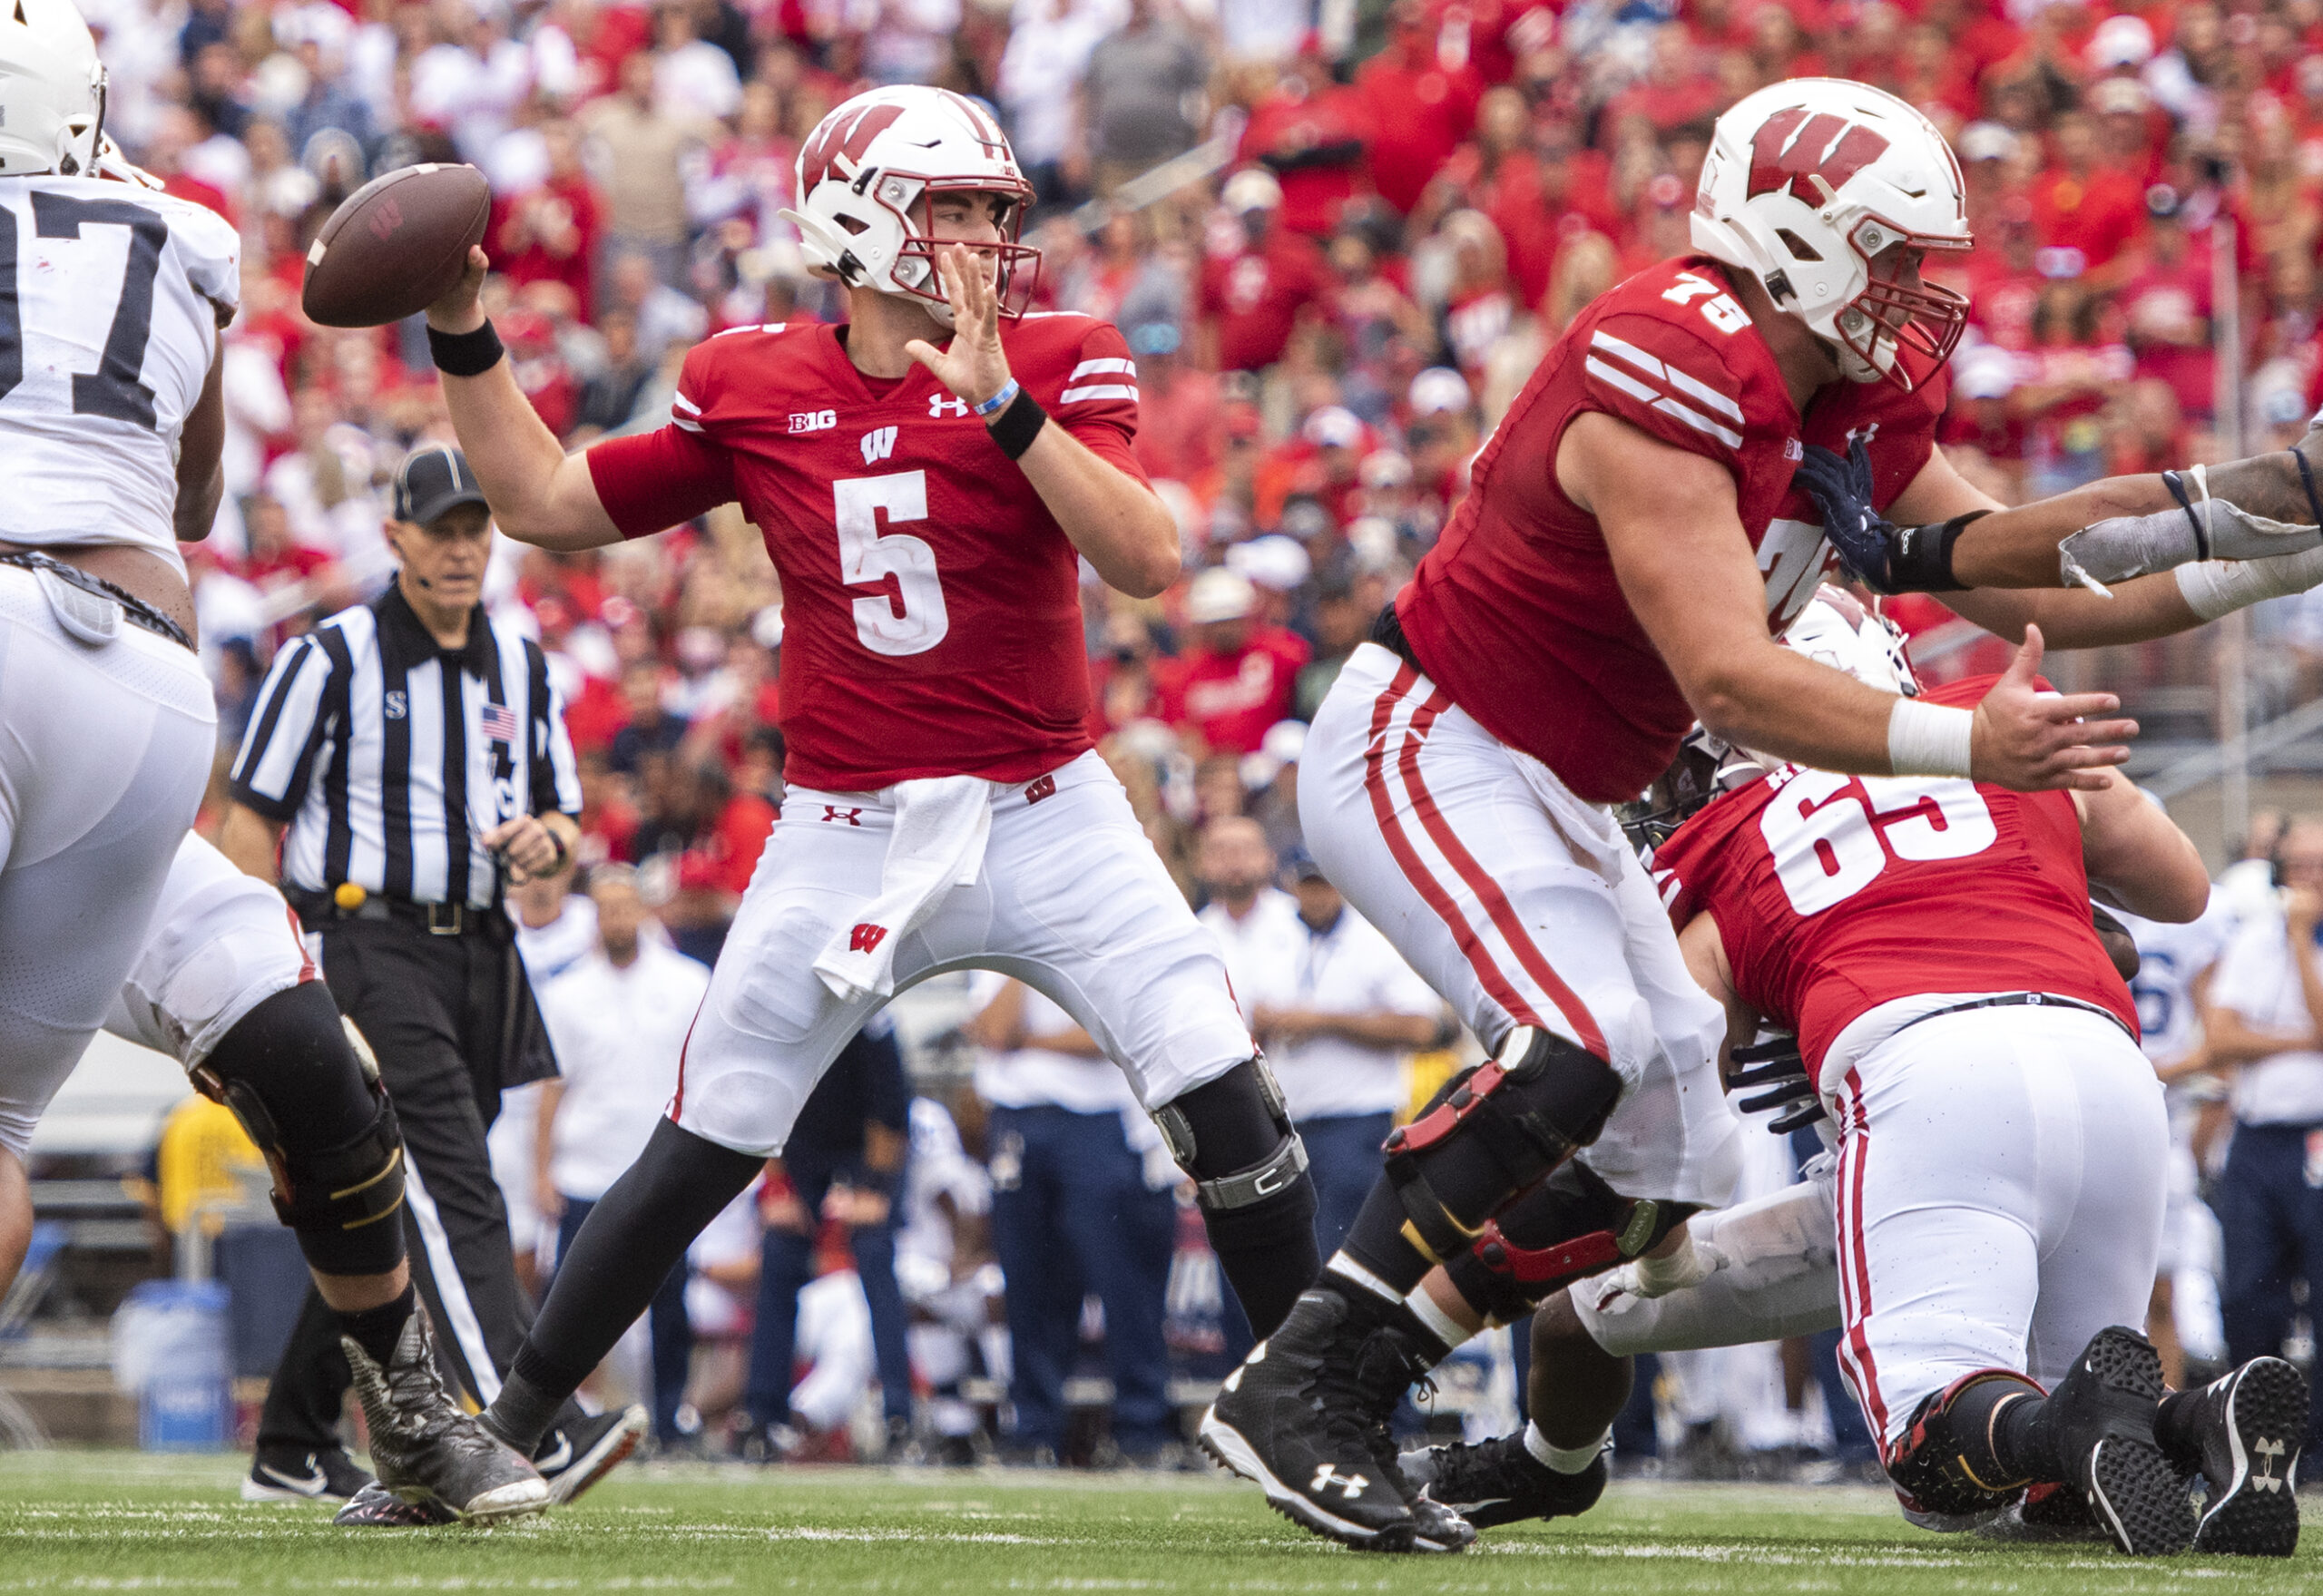 The Wisconsin quarterback reaches back holding the ball before passing.